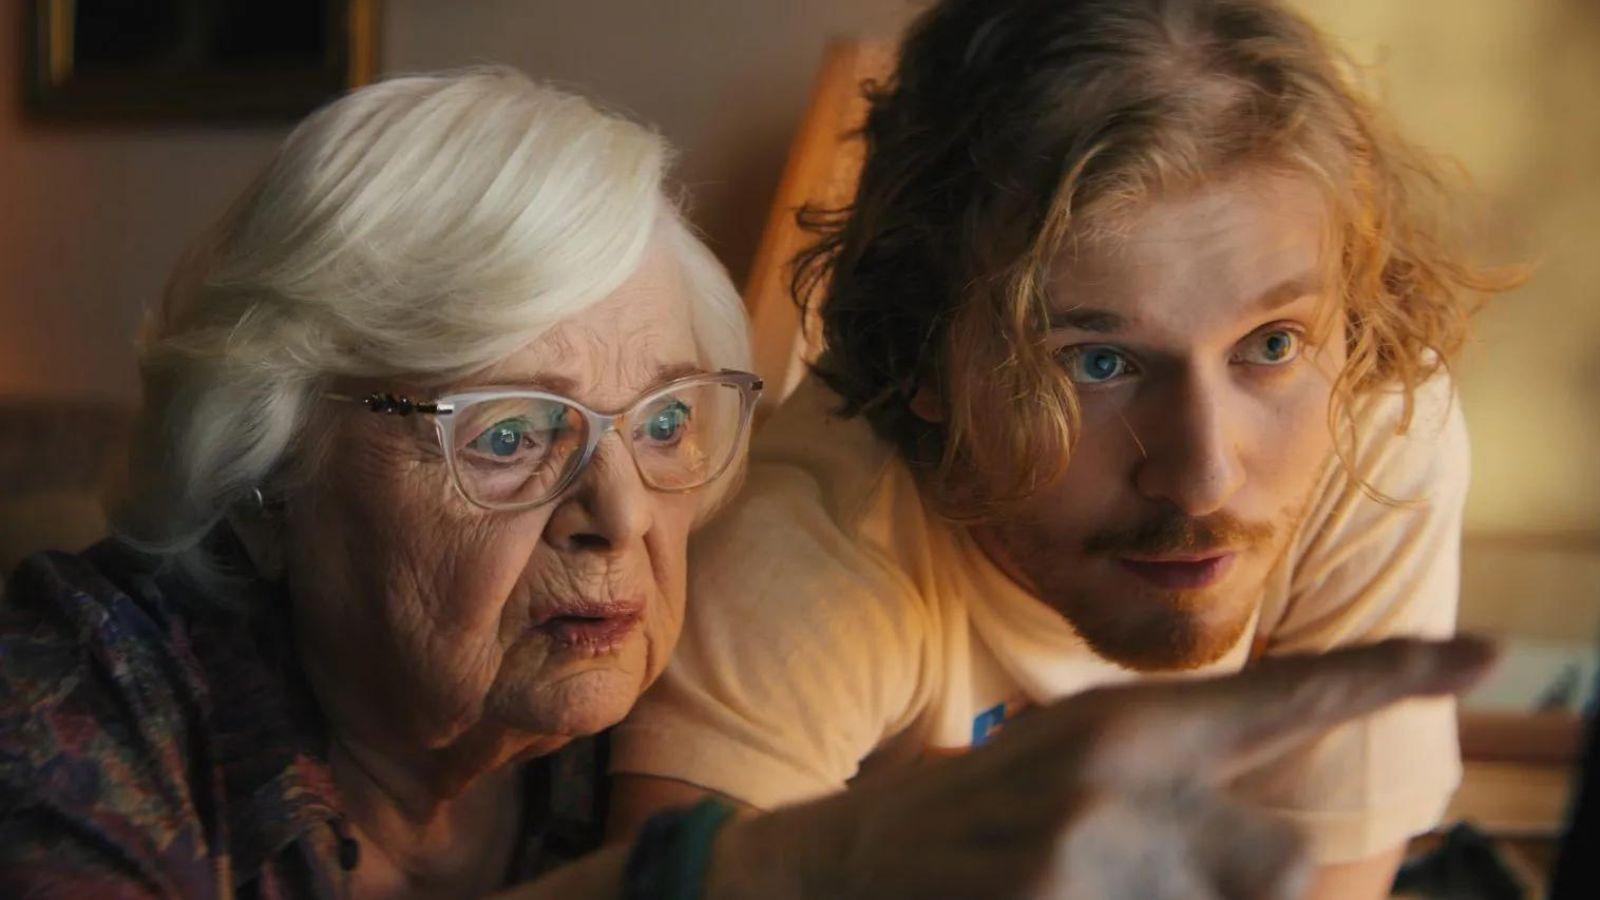 Young Sheldon's Meemaw June Squibb in new movie Thelma